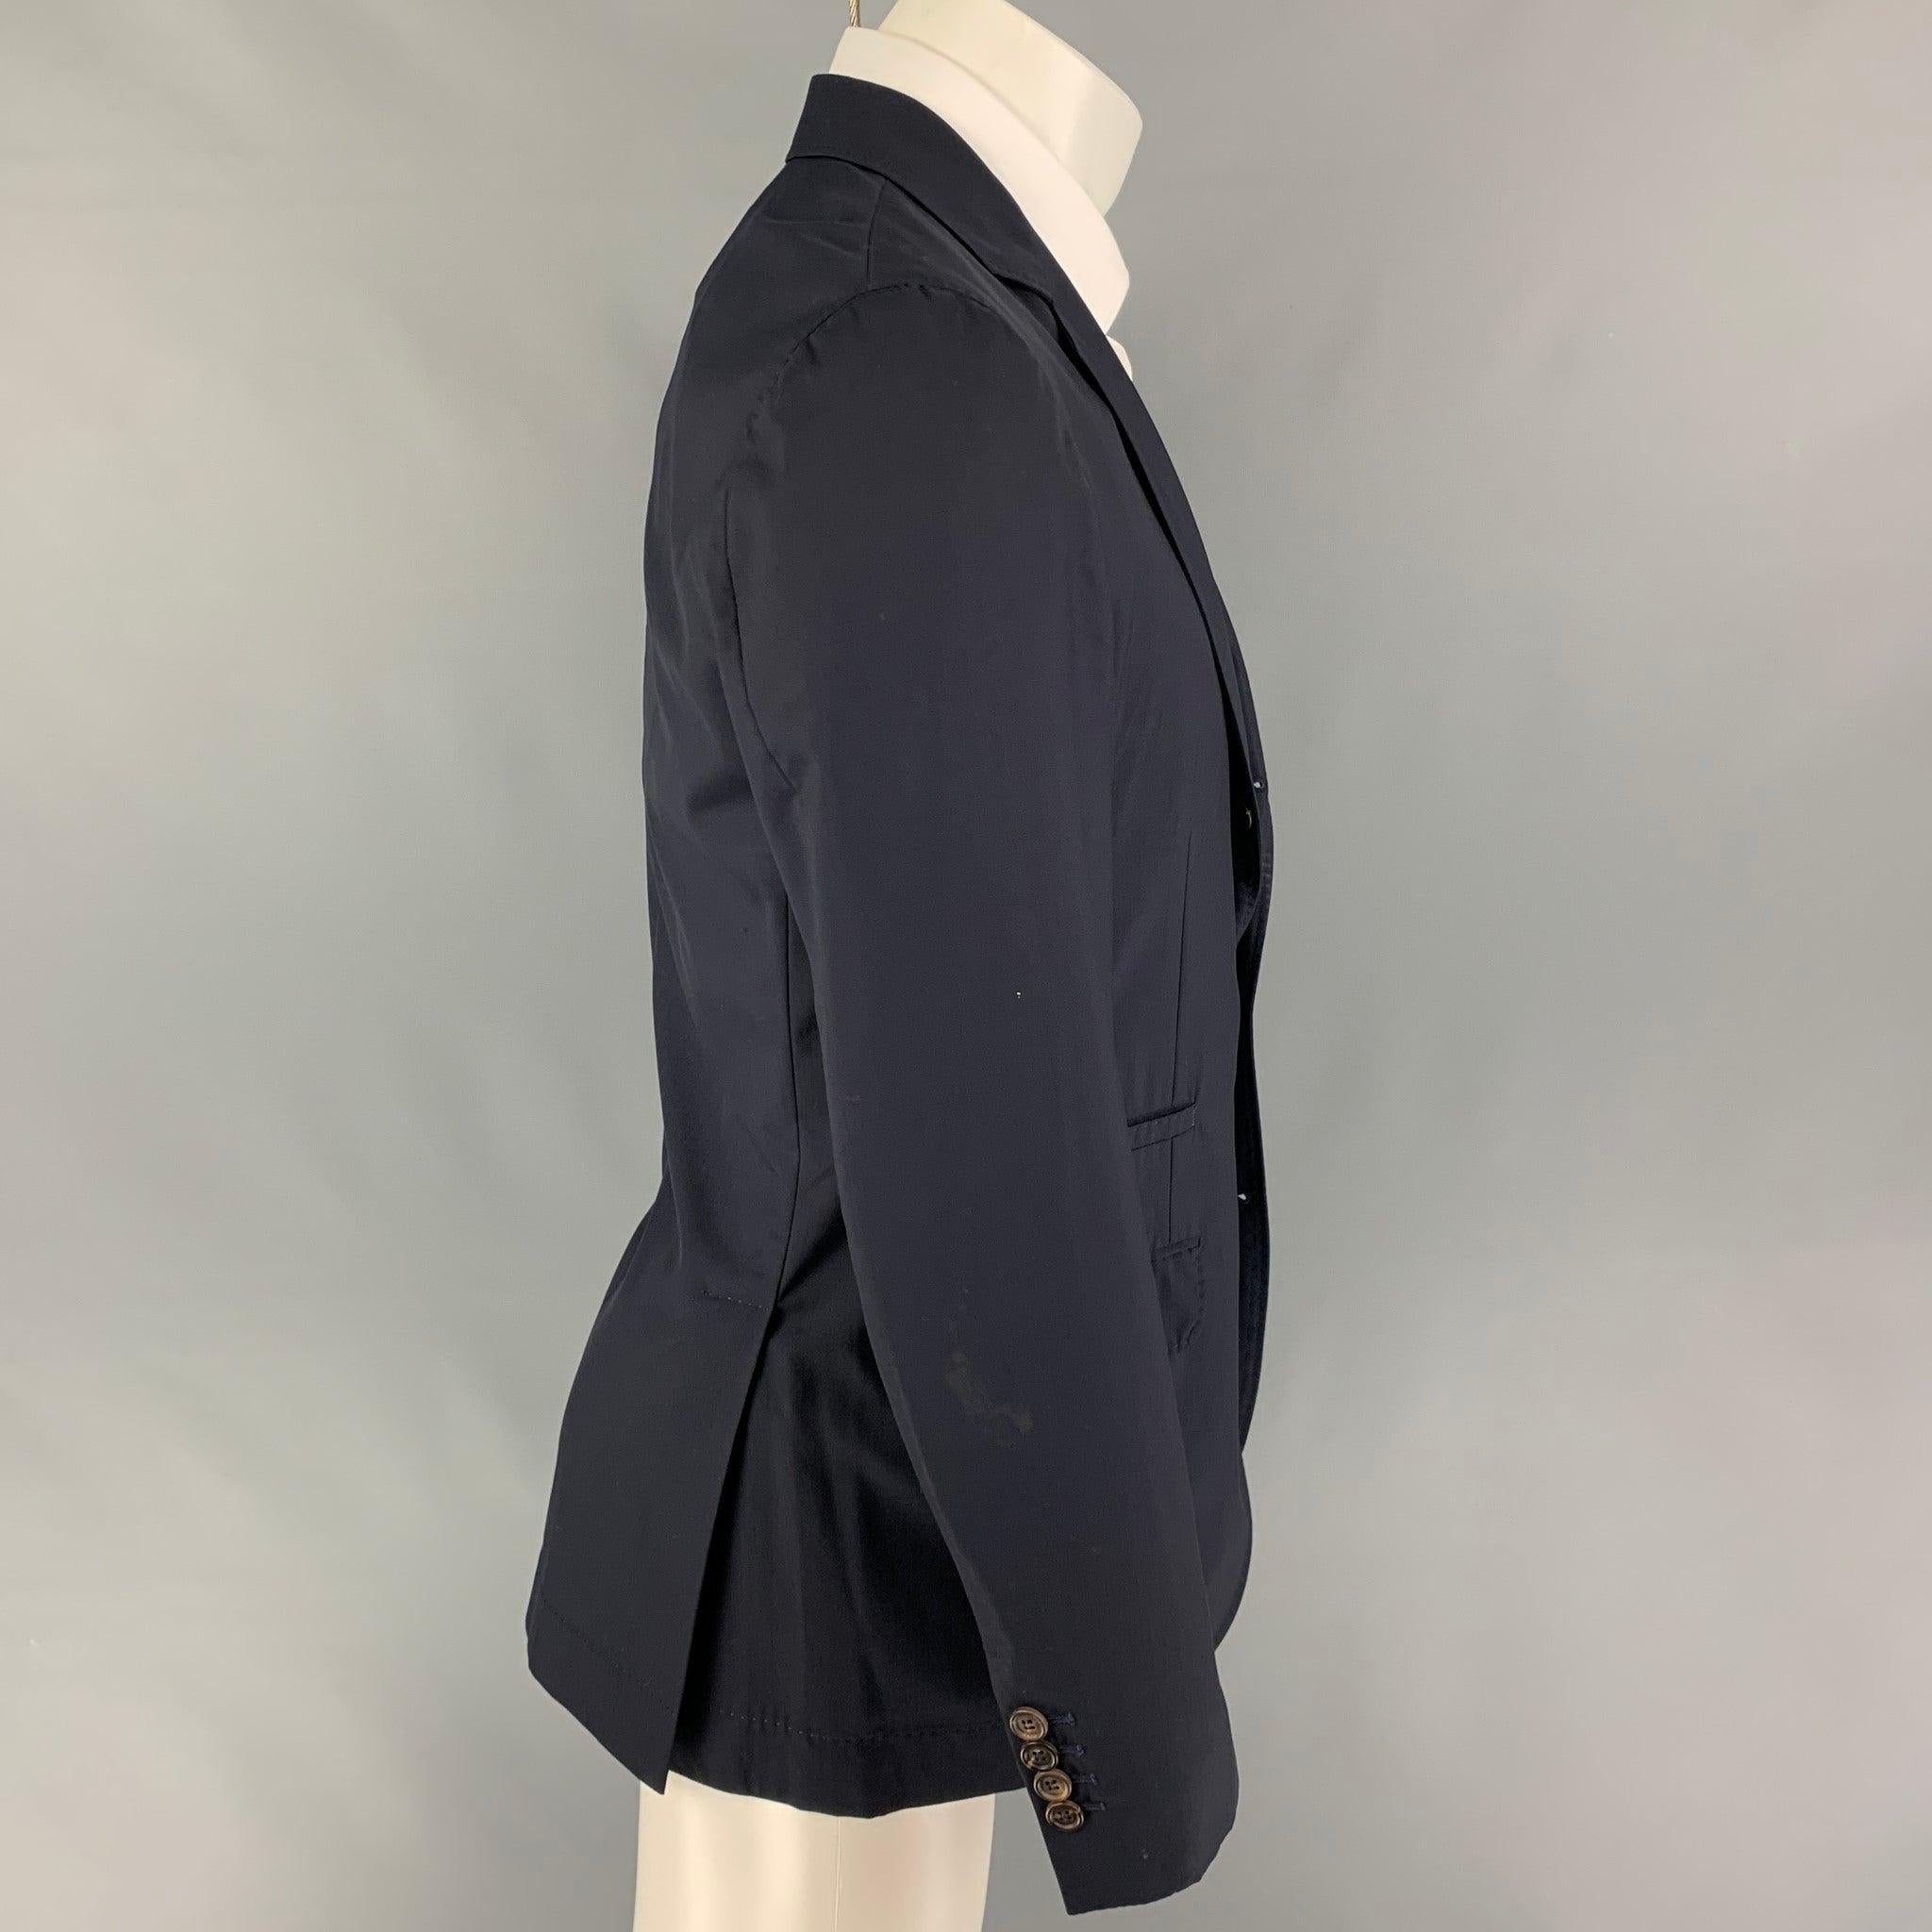 BRUNELLO CUCINELLI sport coat comes in a navy virgin wool / silk featuring a notch lapel, flap pockets, double back vent, and a three button closure. Includes garment bag. Made in Italy.
Good Pre-Owned Condition. Missing button, cuff altered, and